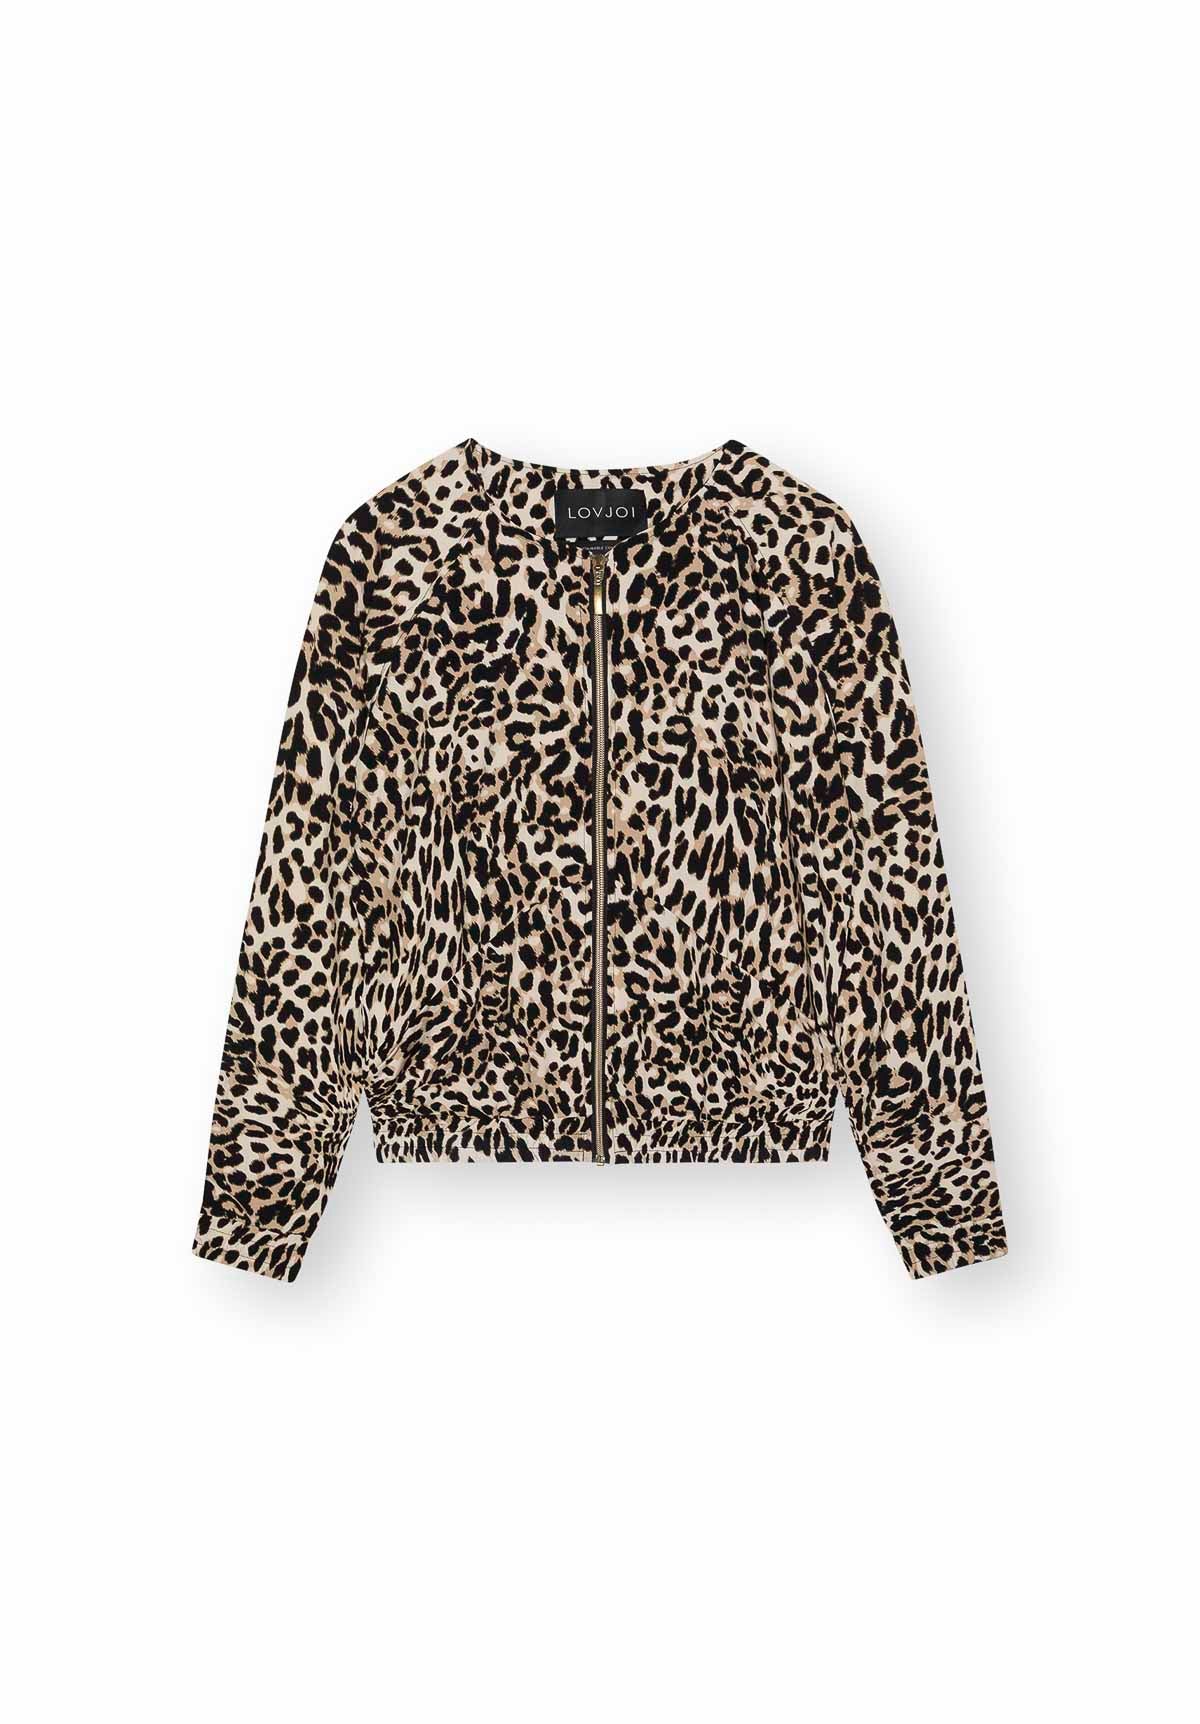 Blouson BOCA in animal print by LOVJOI made from Ecovero™